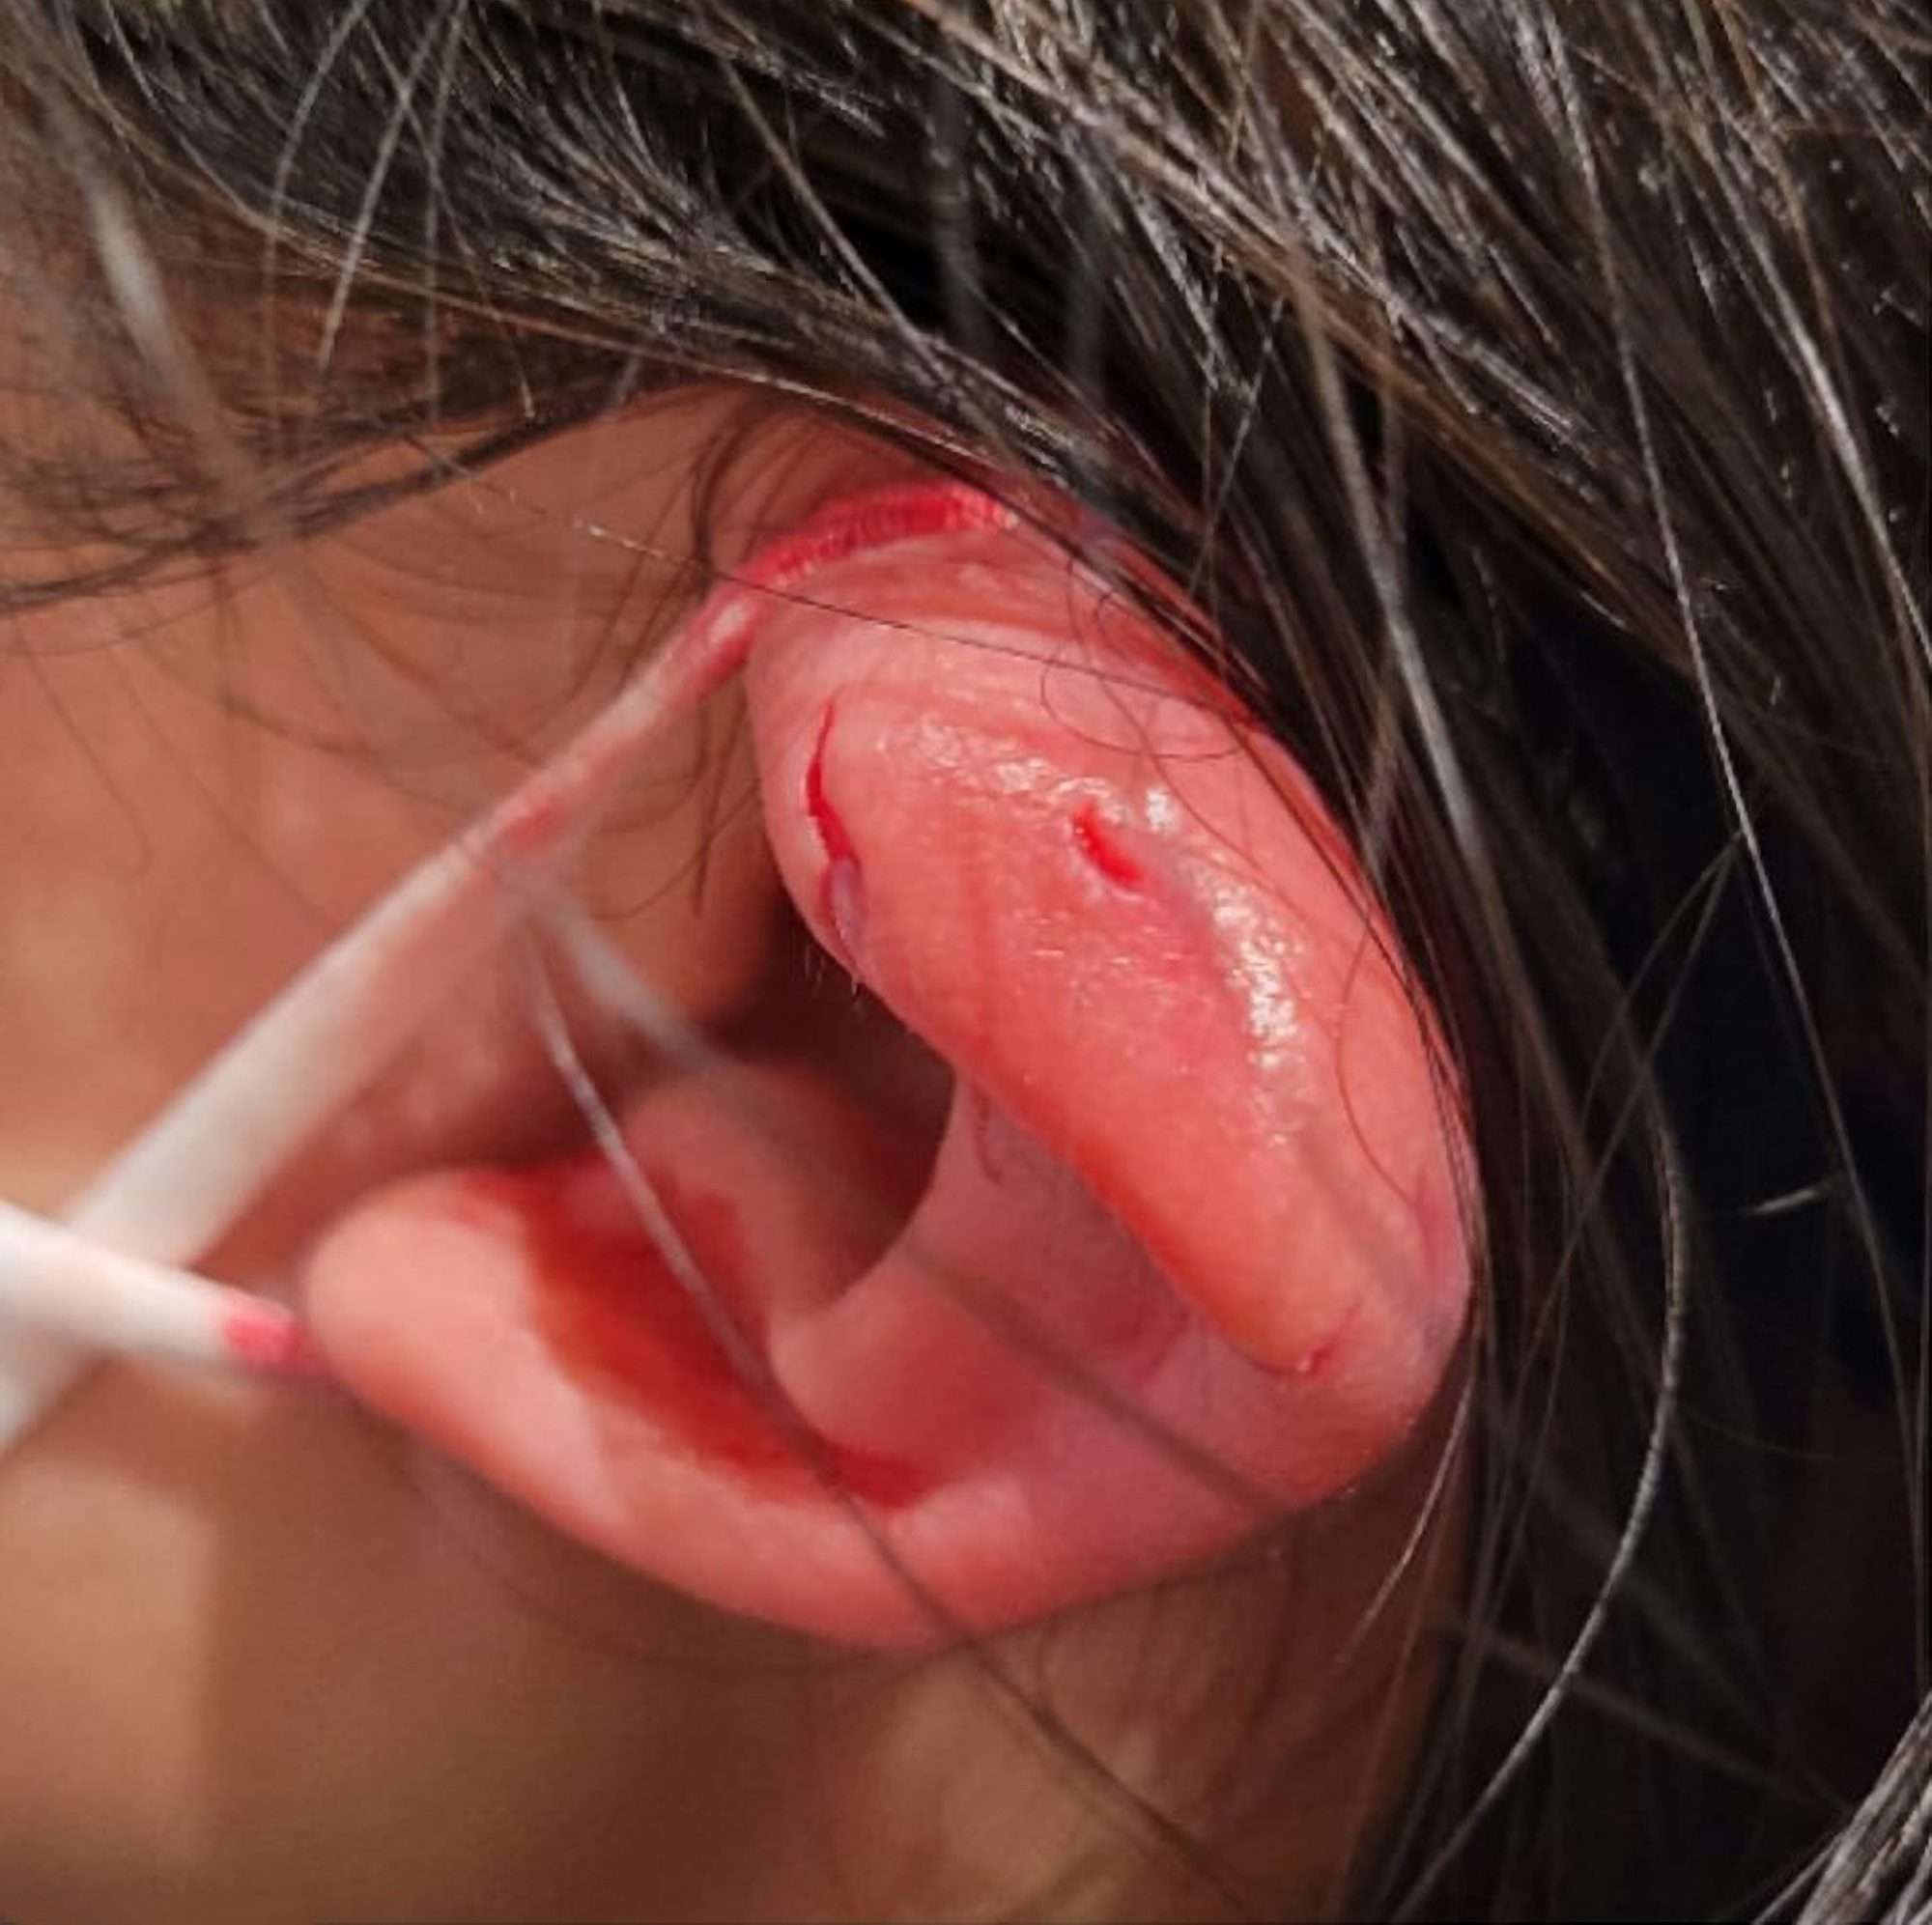 Read more about the article Bad-Tempered Cockatoo Bites Girl’s Ear